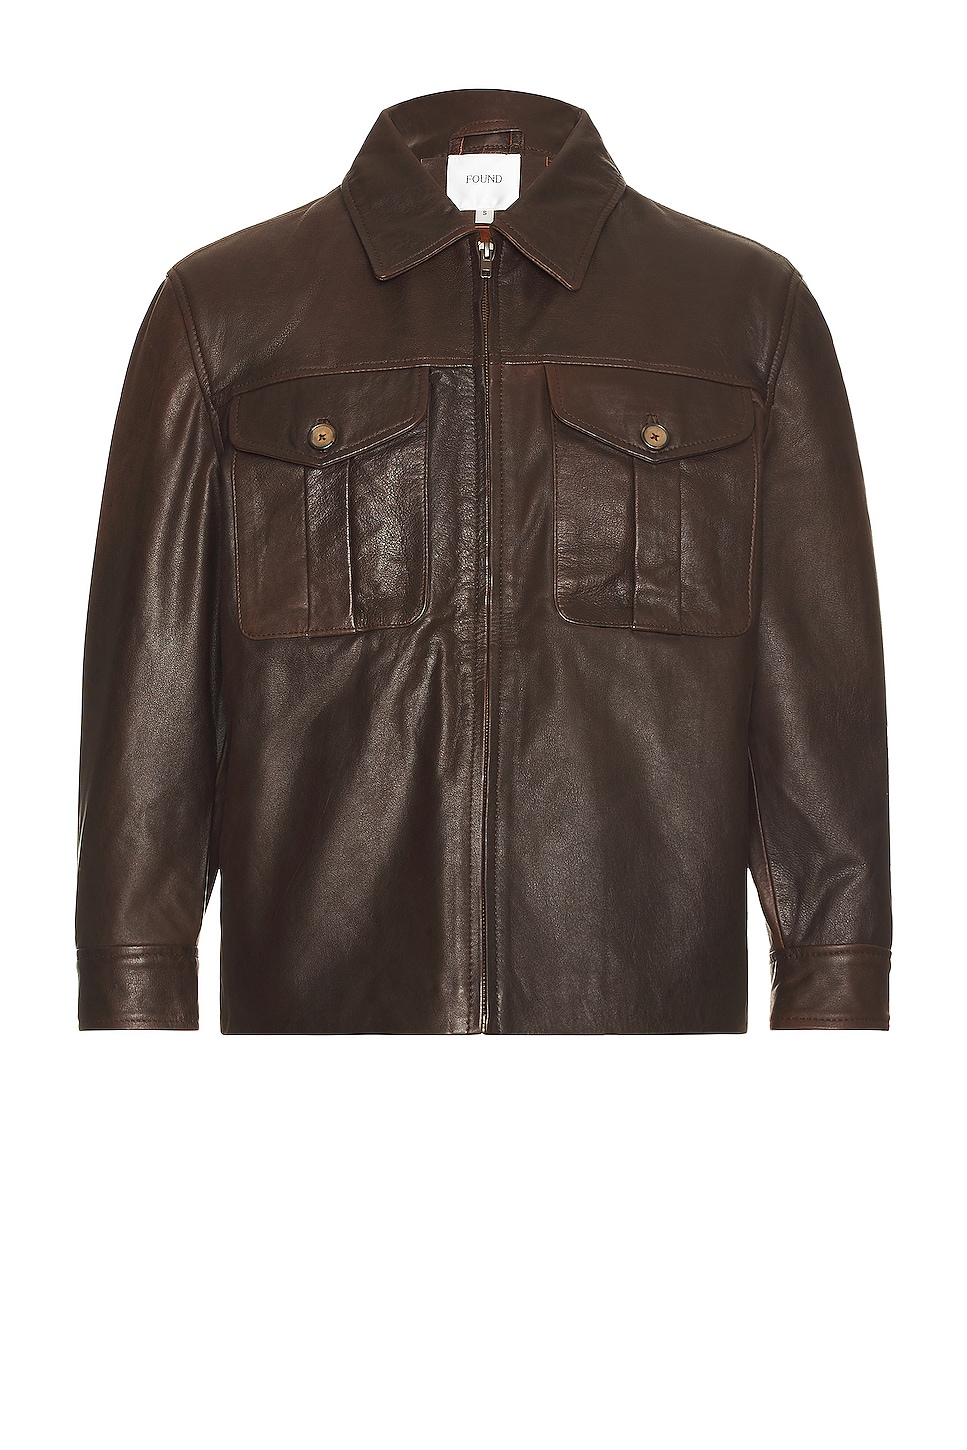 Image 1 of Found Leather Over Shirt in Brown